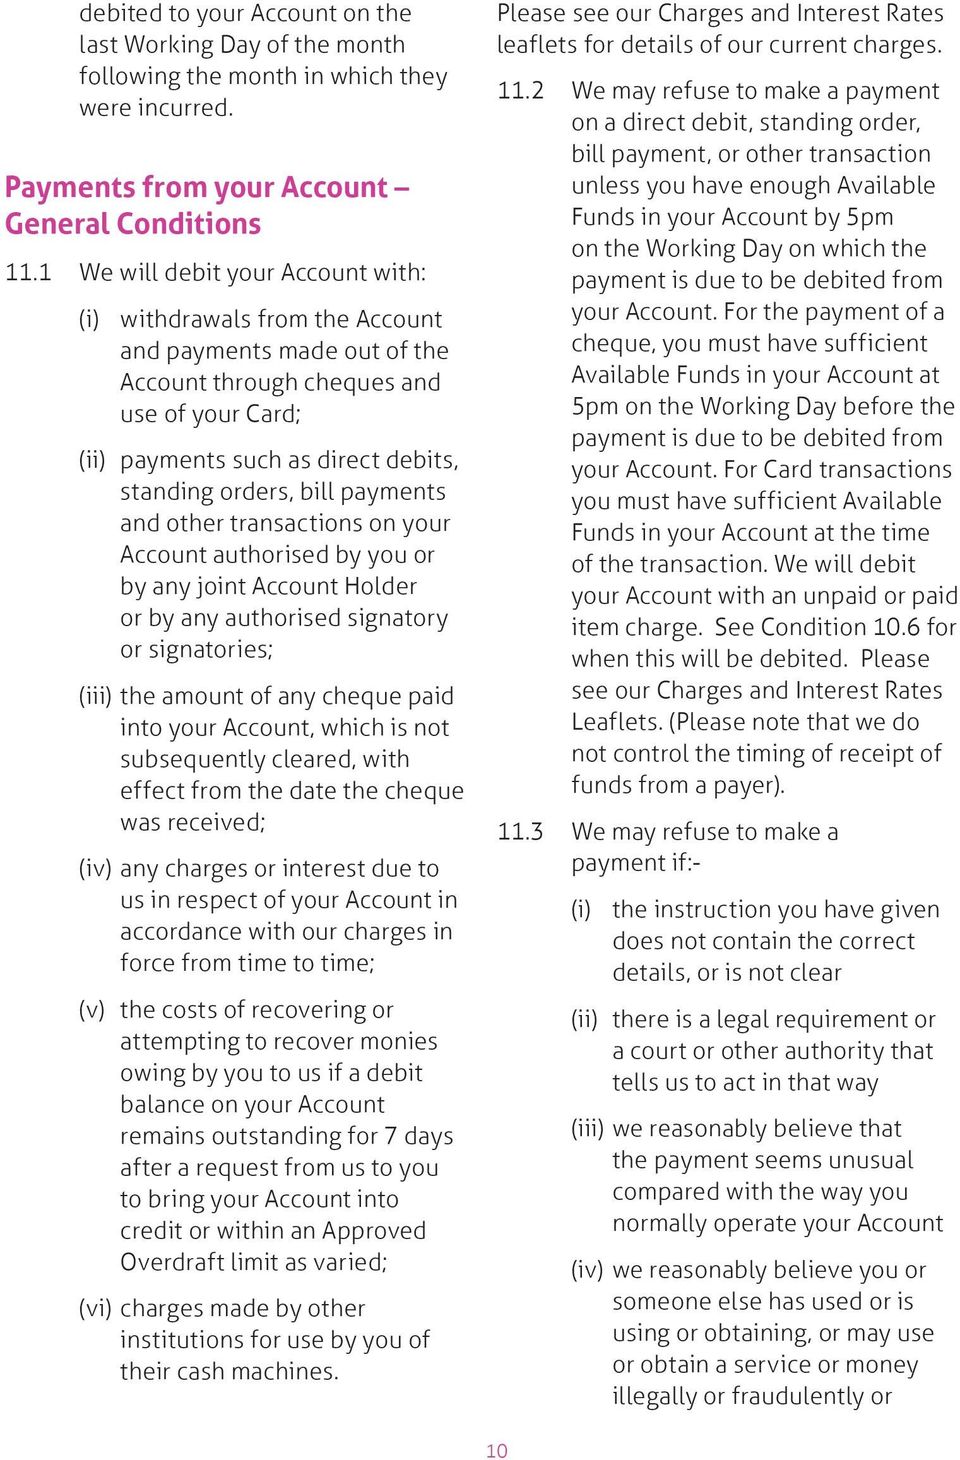 bill payments and other transactions on your Account authorised by you or by any joint Account Holder or by any authorised signatory or signatories; (iii) the amount of any cheque paid into your